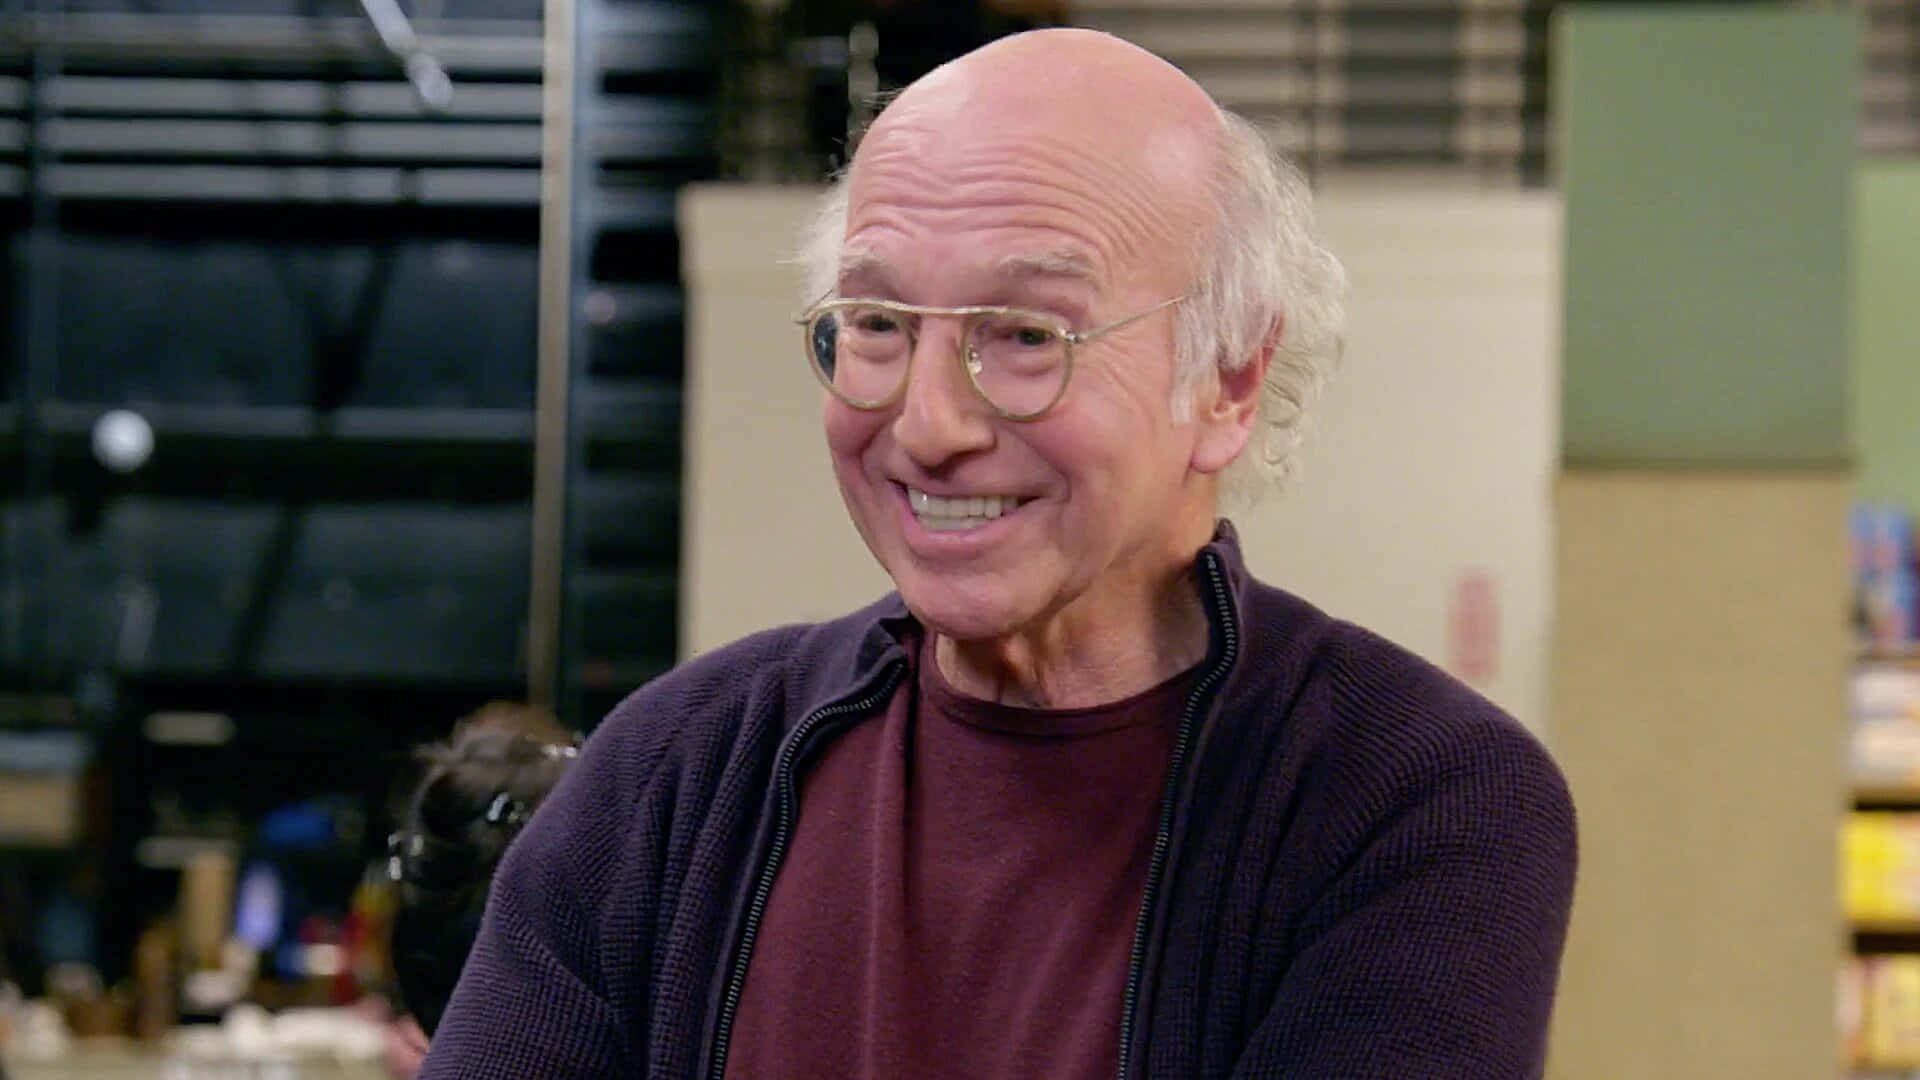 Larry David in his classic television show, "Curb Your Enthusiasm" Wallpaper